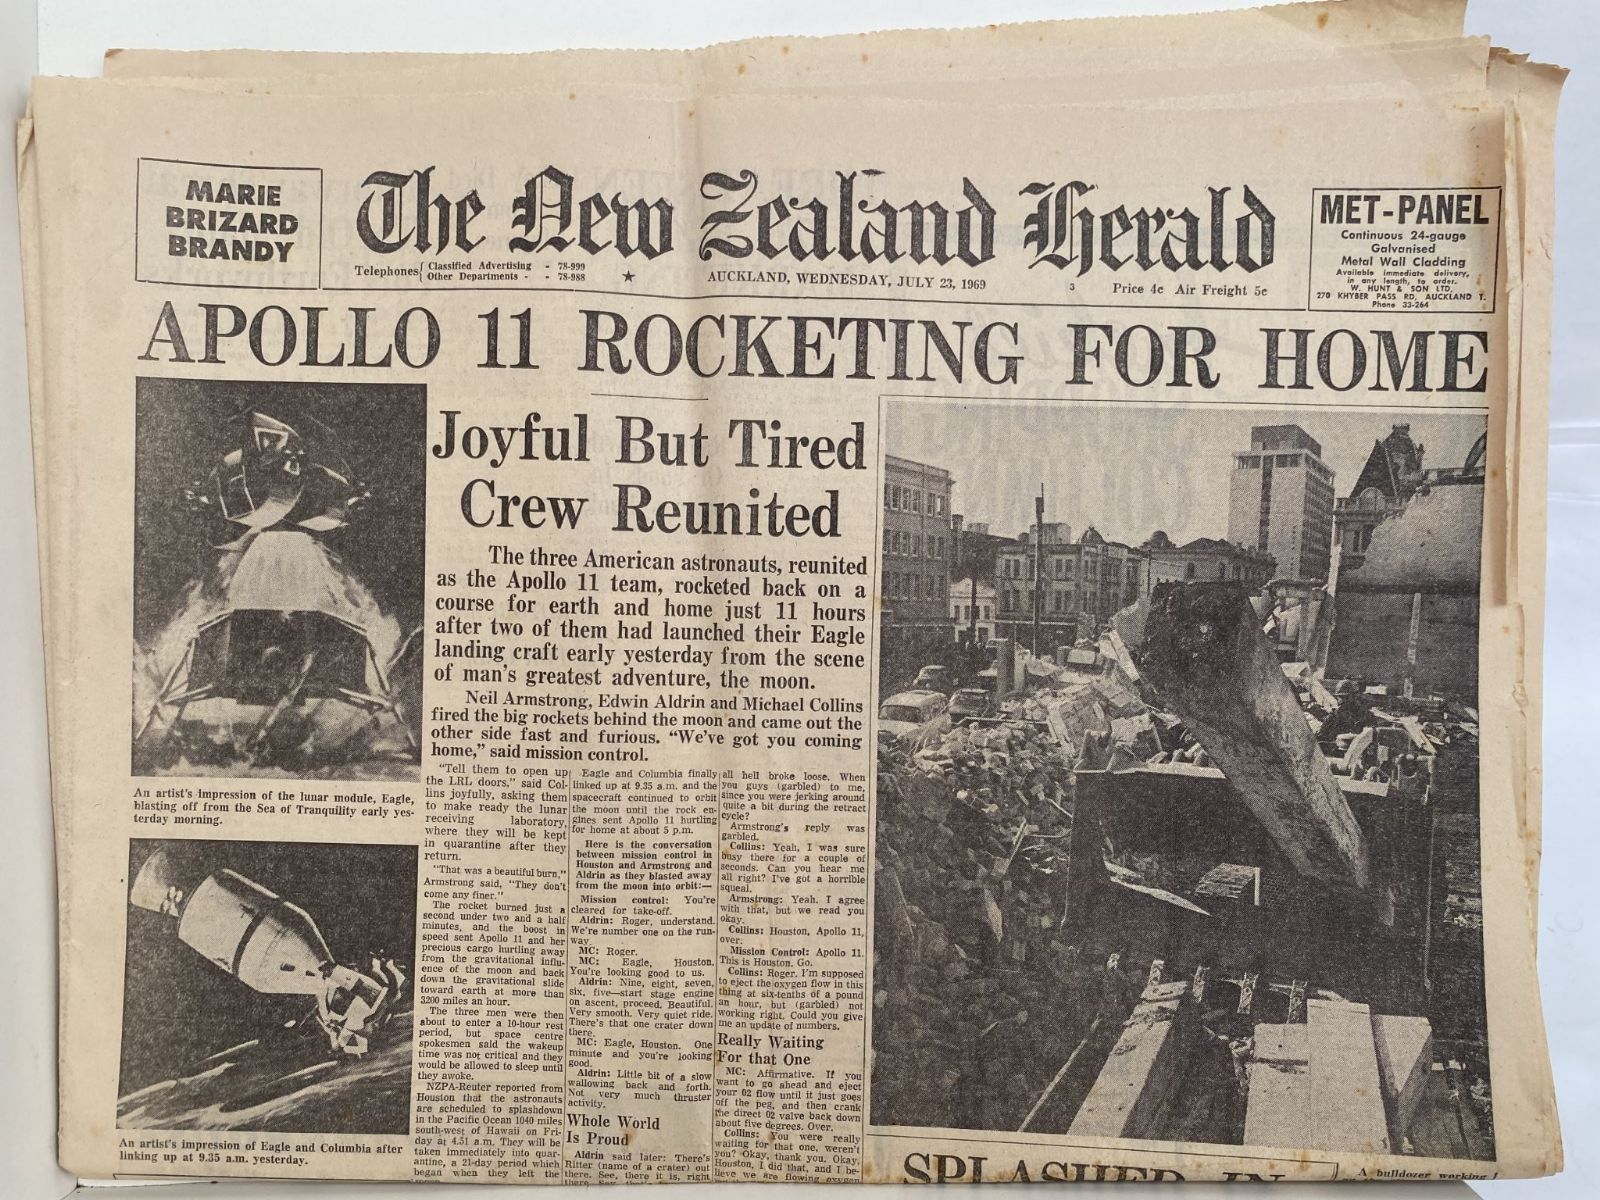 OLD NEWSPAPER: The New Zealand Herald, 23 July 1969 - Moon Landing Special